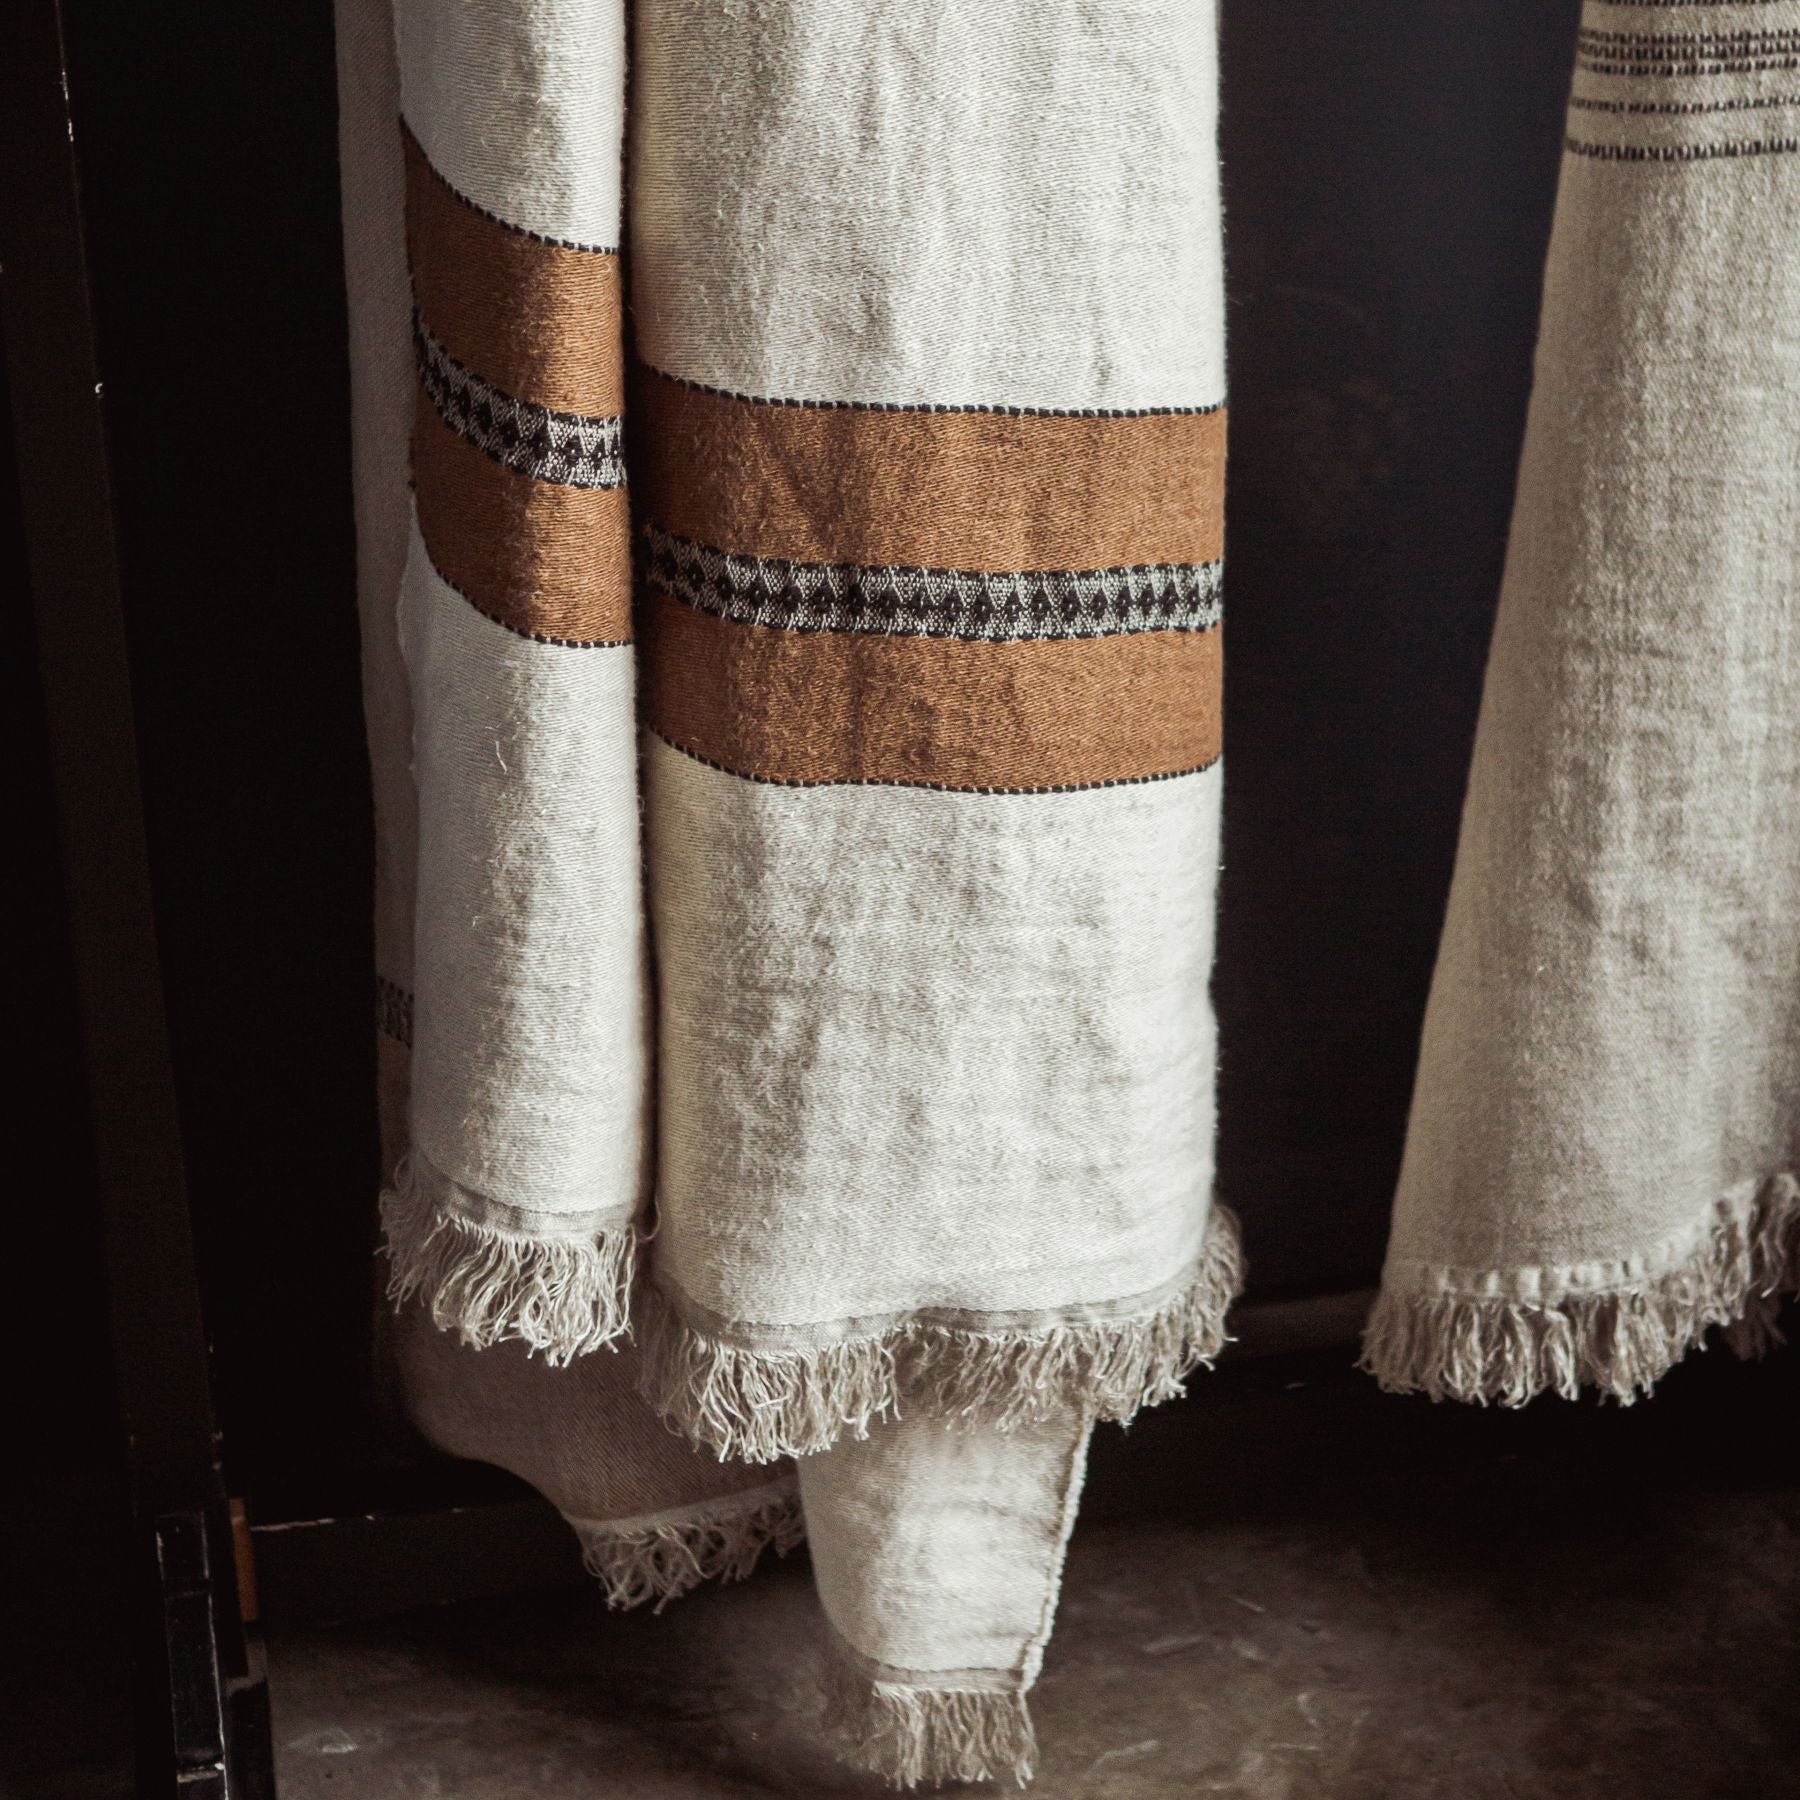 etienne throw blanket belgian linen by libeco on adorn.house